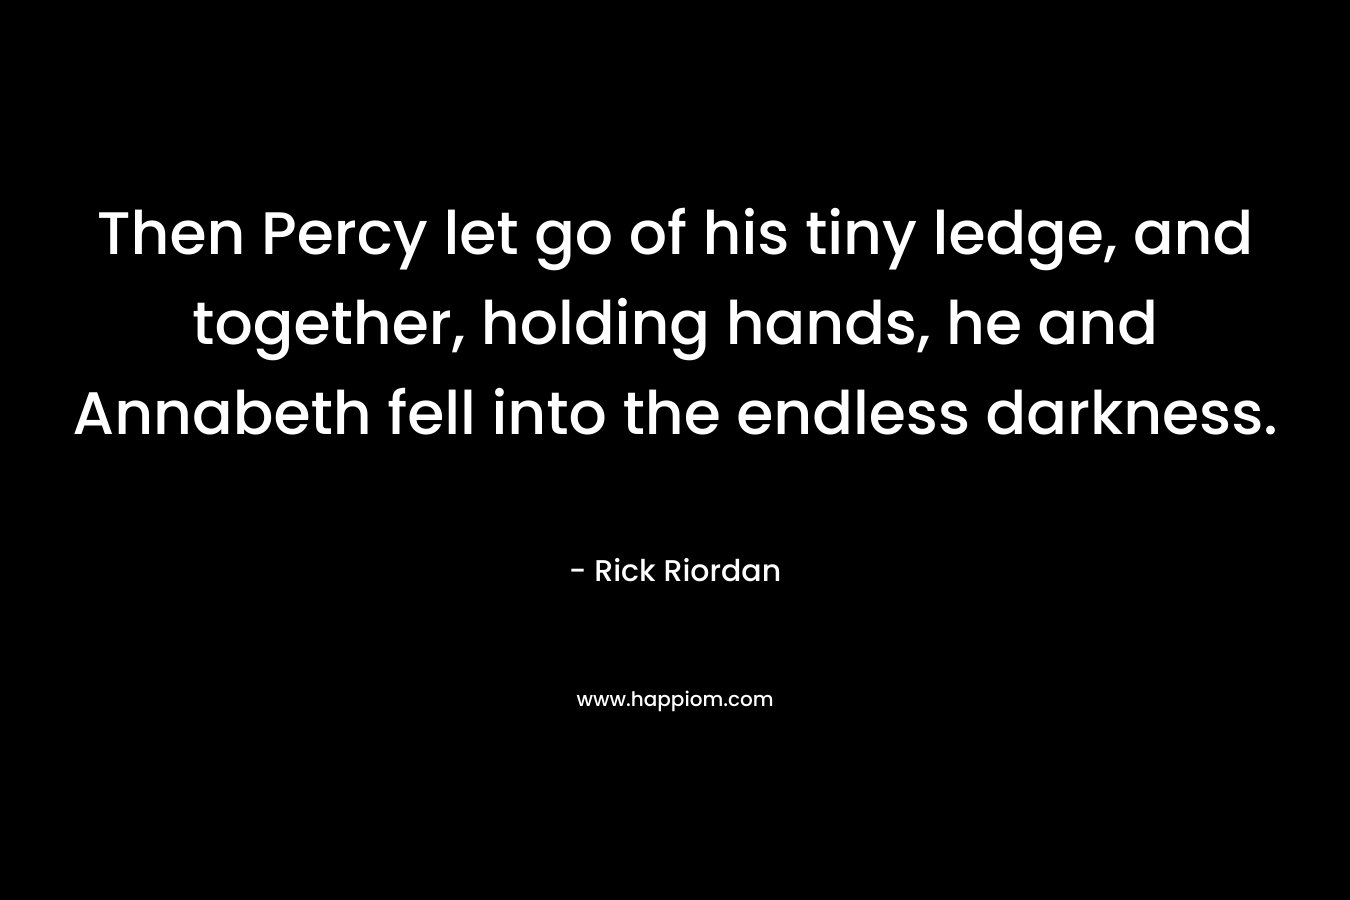 Then Percy let go of his tiny ledge, and together, holding hands, he and Annabeth fell into the endless darkness. – Rick Riordan